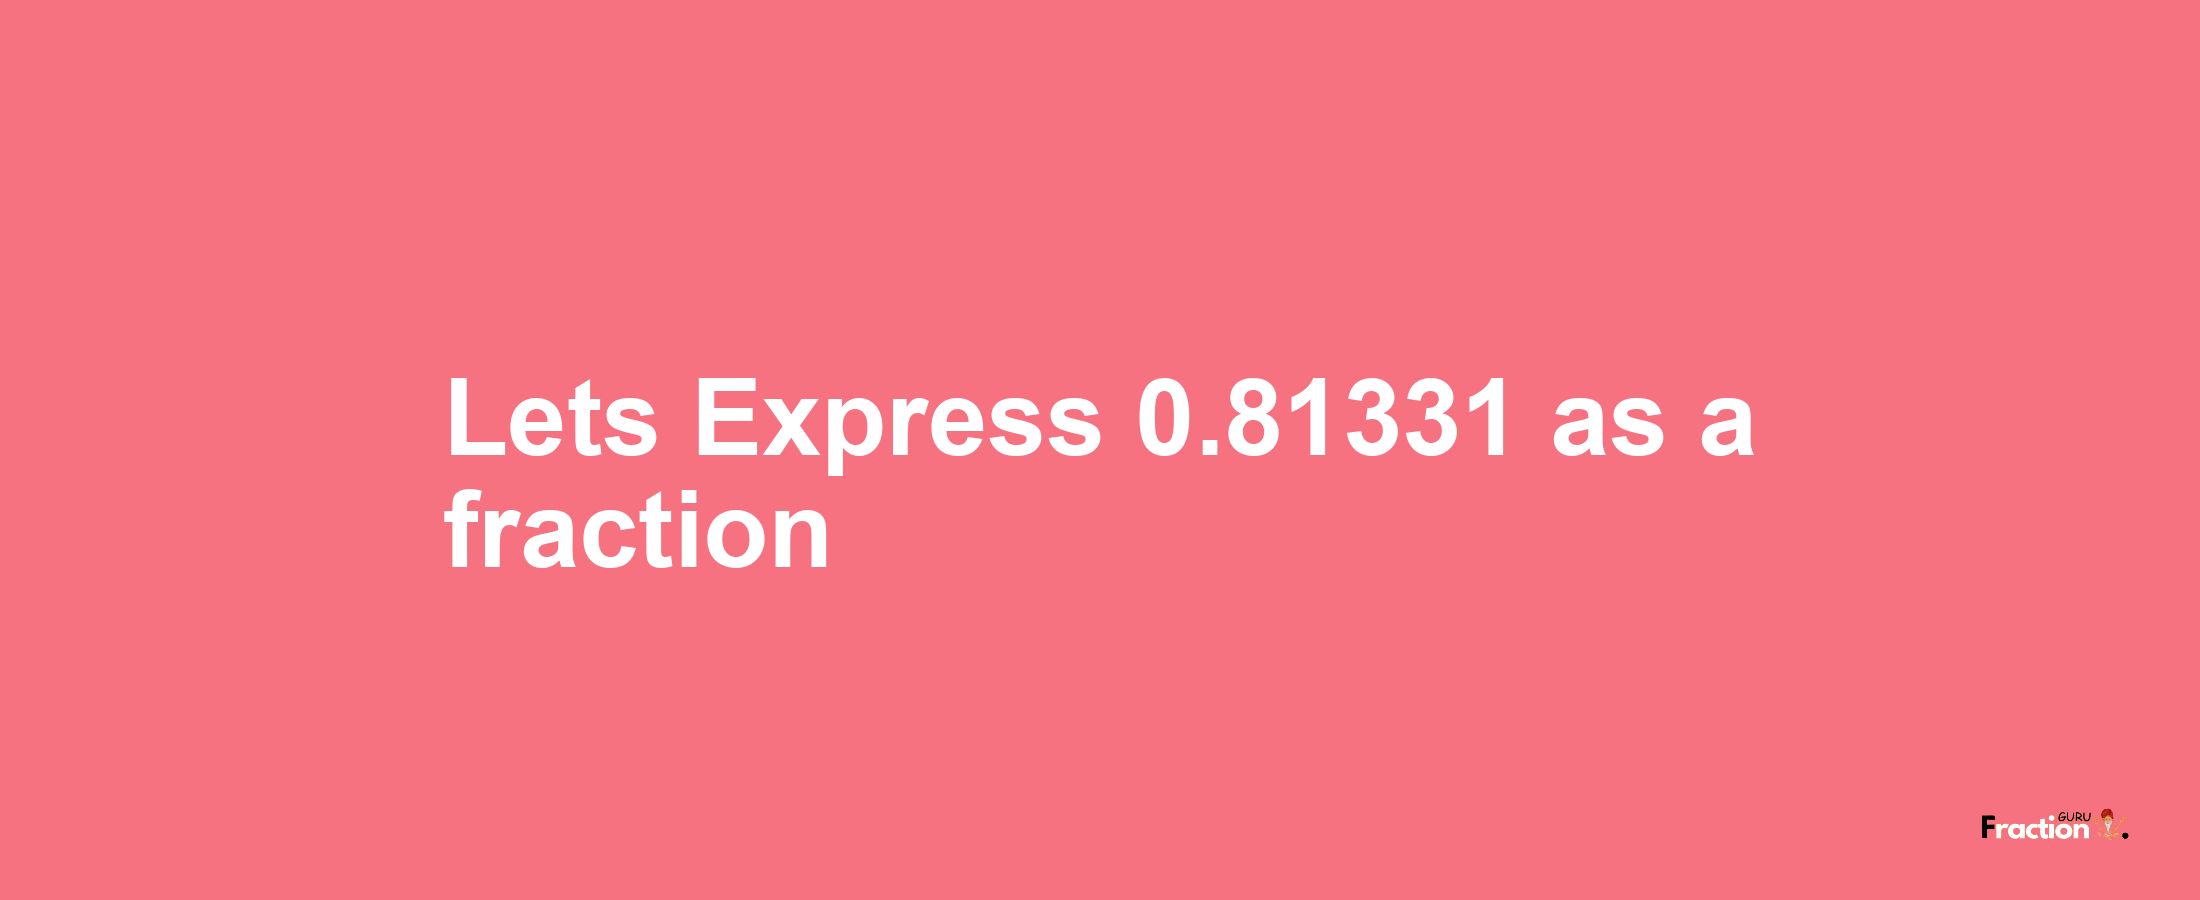 Lets Express 0.81331 as afraction